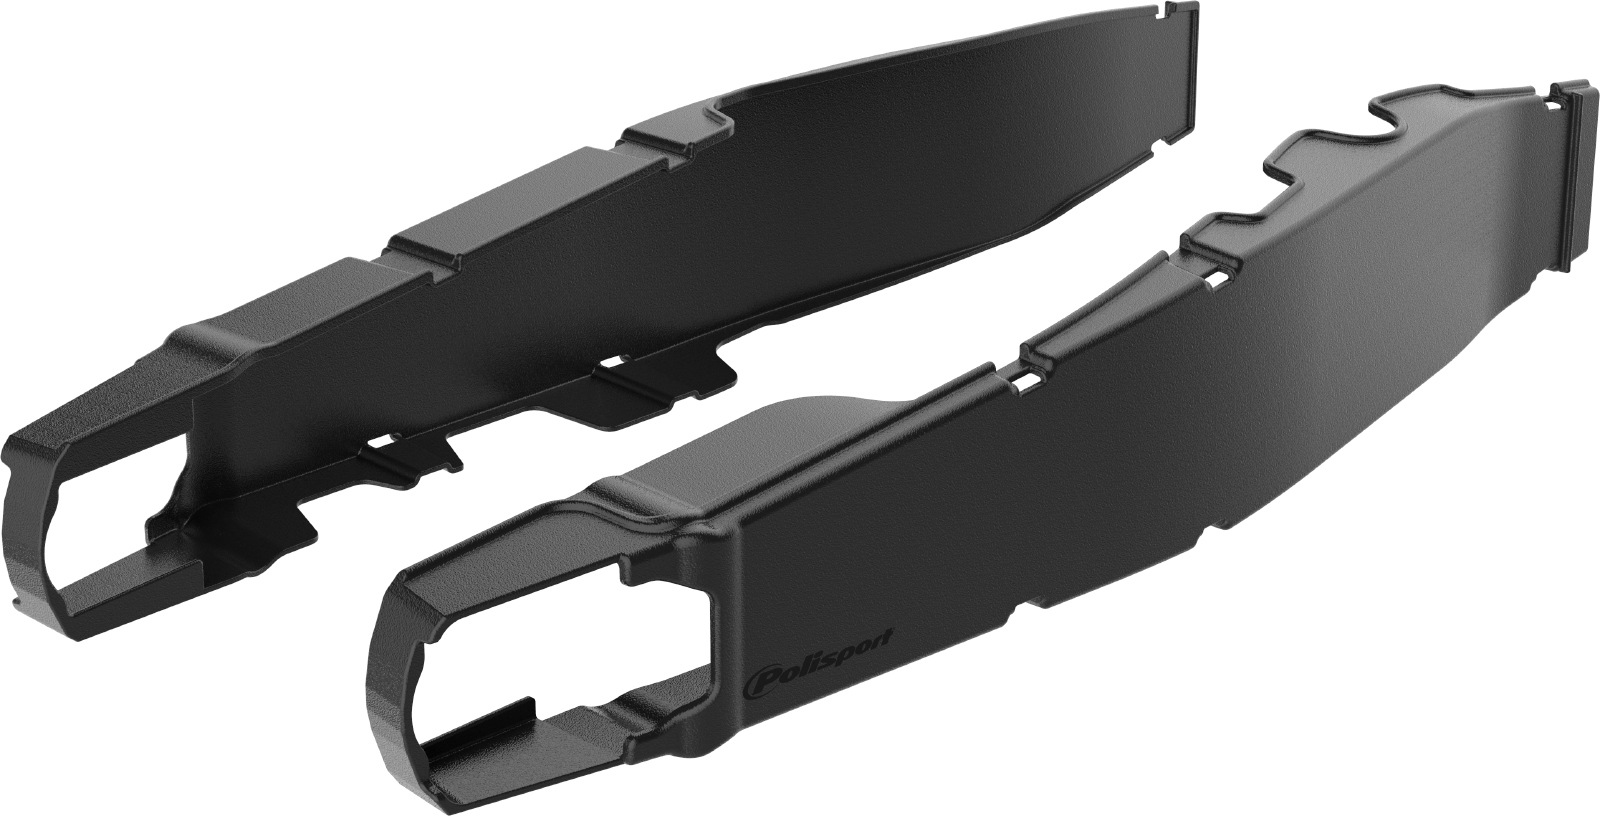 Black Swingarm Protectors - For 17-18 CRF450R/RX & 18-19 CRF250R/RX - Click Image to Close